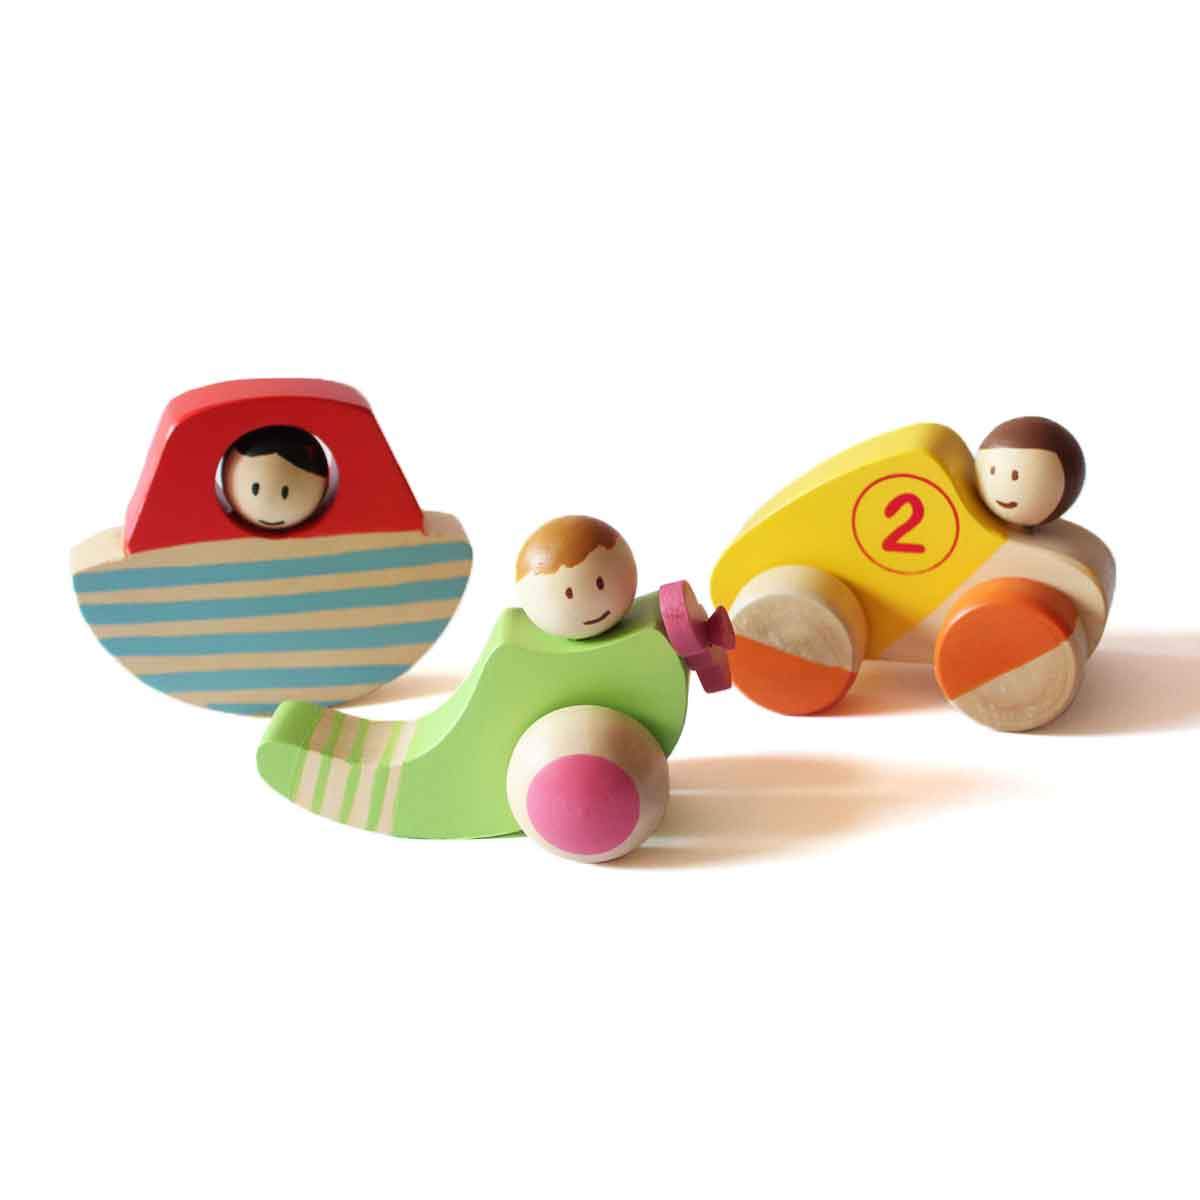 Shumee Wooden Vehicle Set- Car, Boat And Helicopter - PP-IN-WV3-2yrs-0080